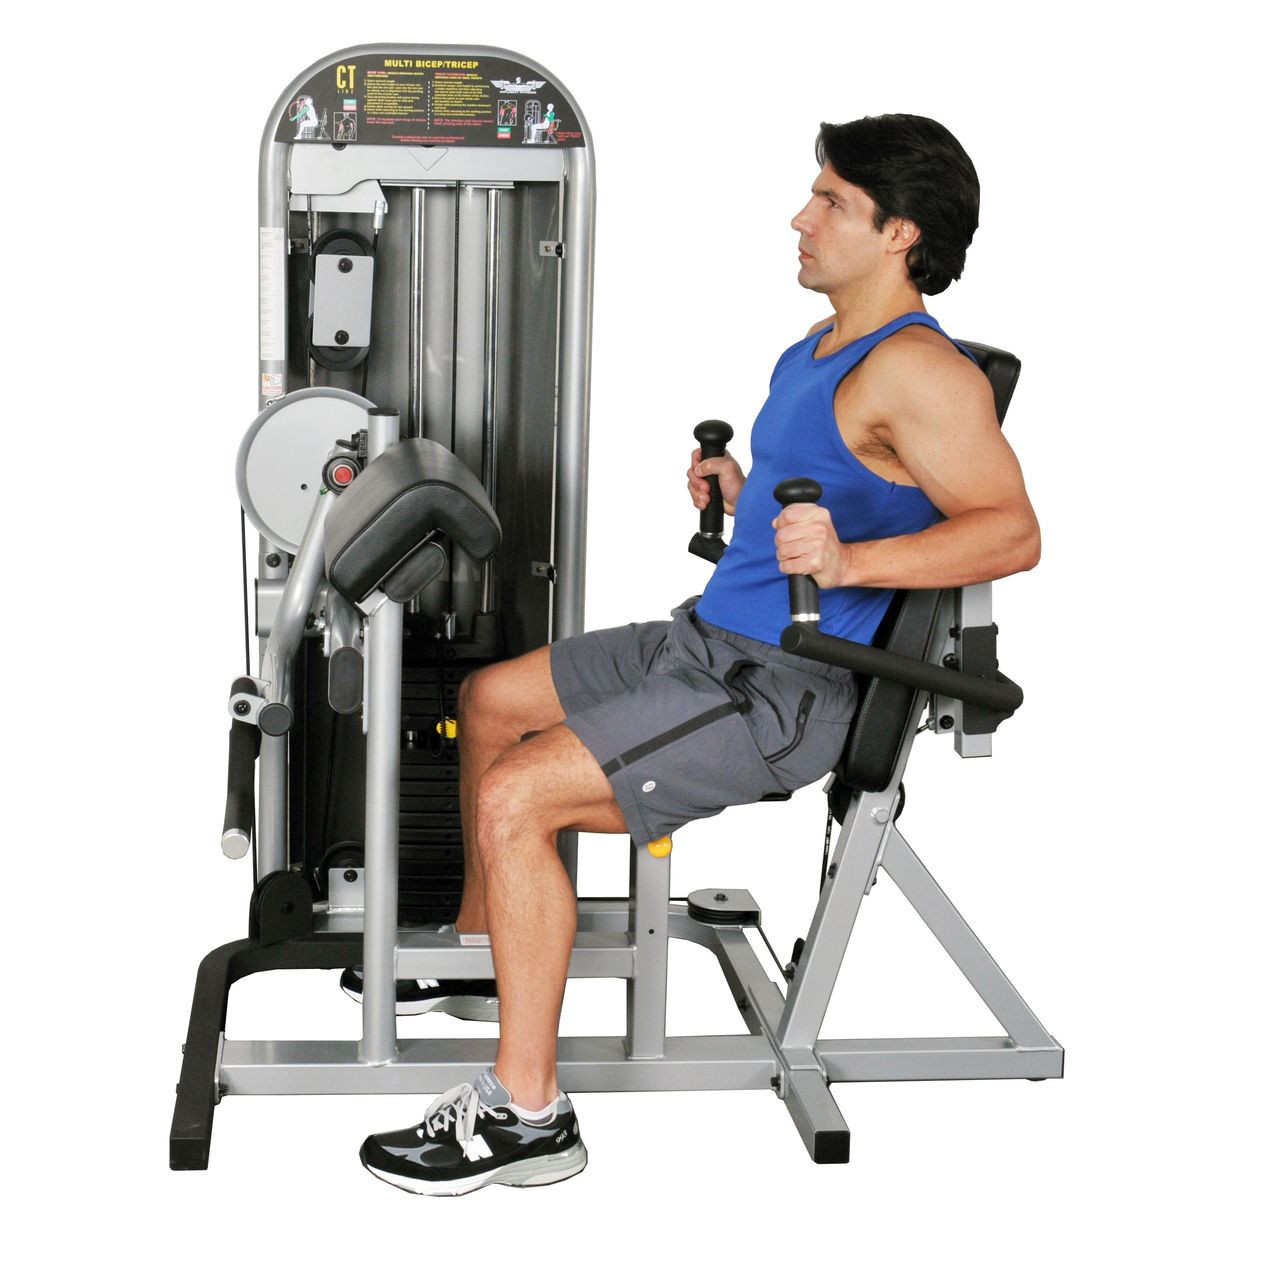 6 Day Arm Exercise Machine At Gym for push your ABS